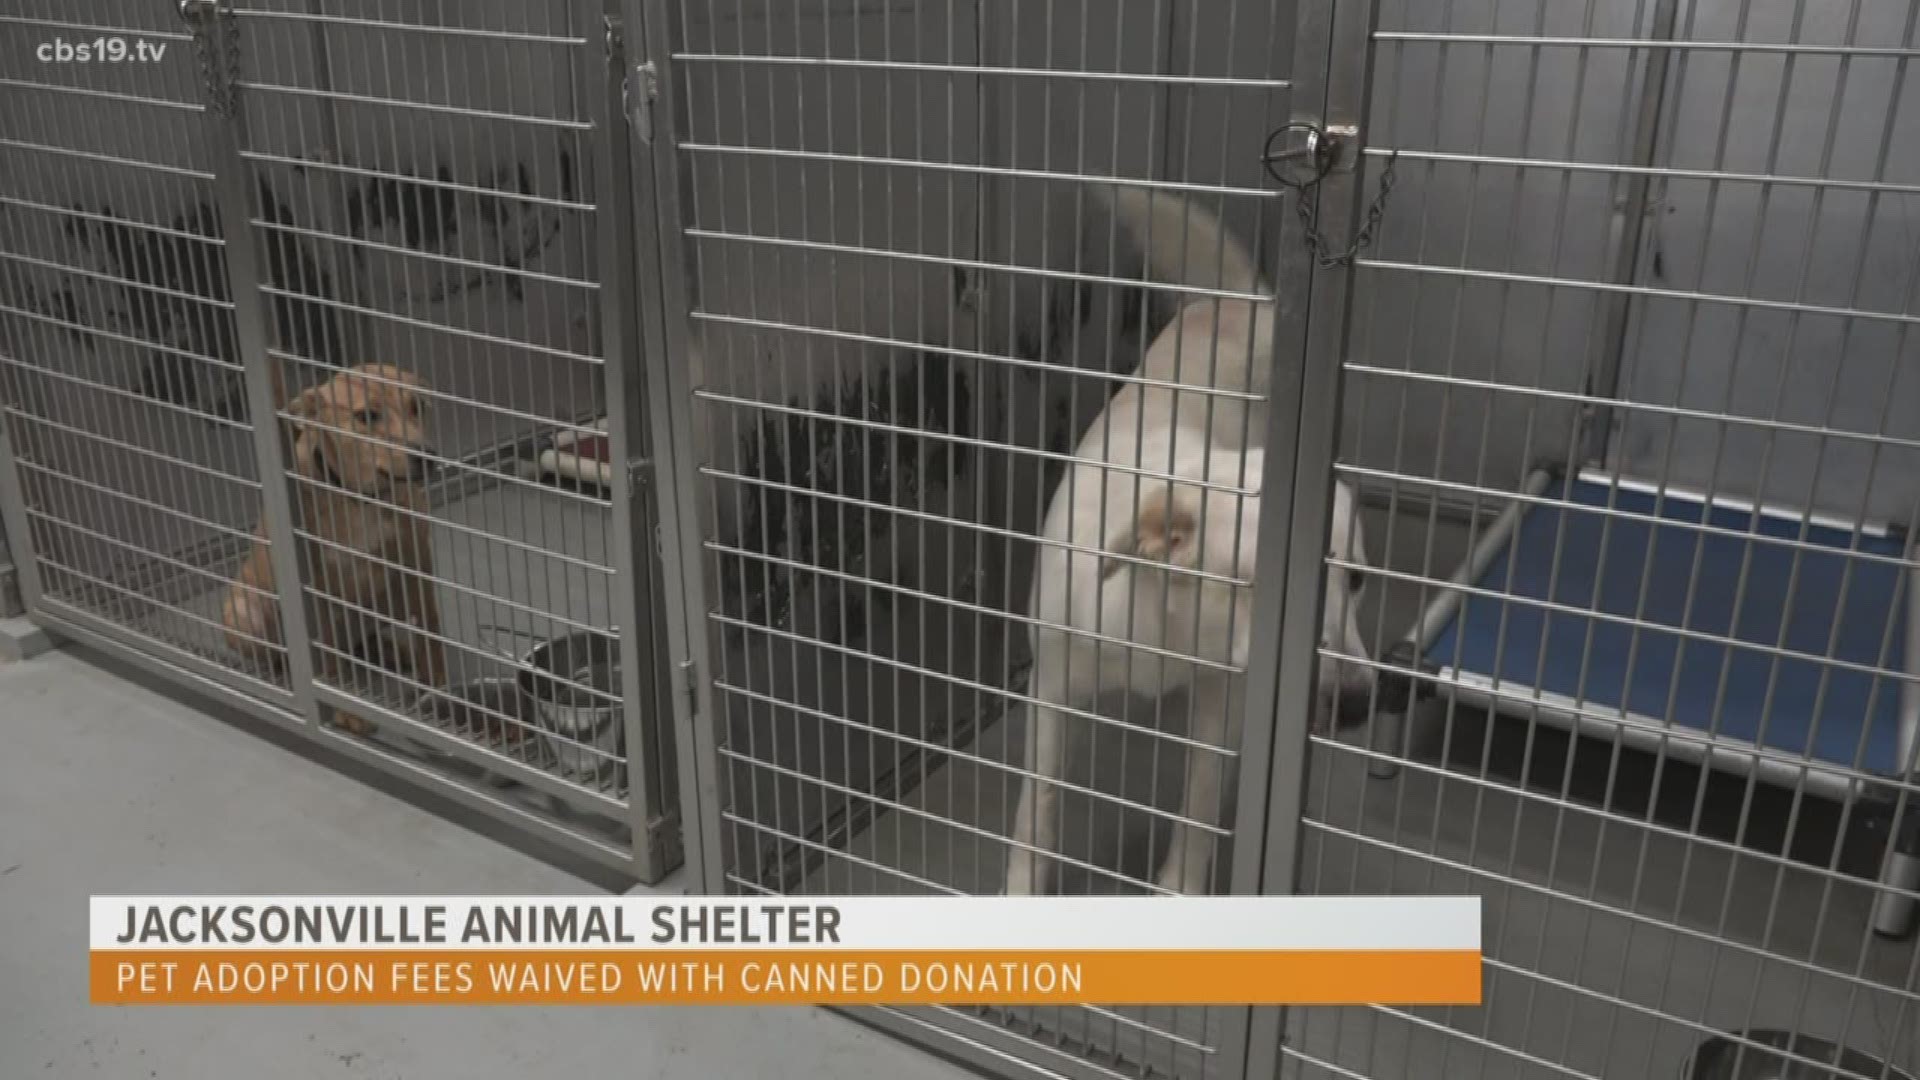 Looking to give a pet a forever home? Bring four canned donations(for people, not pets) to the Jacksonville Animal Shelter, and the adoption fee will be waived.